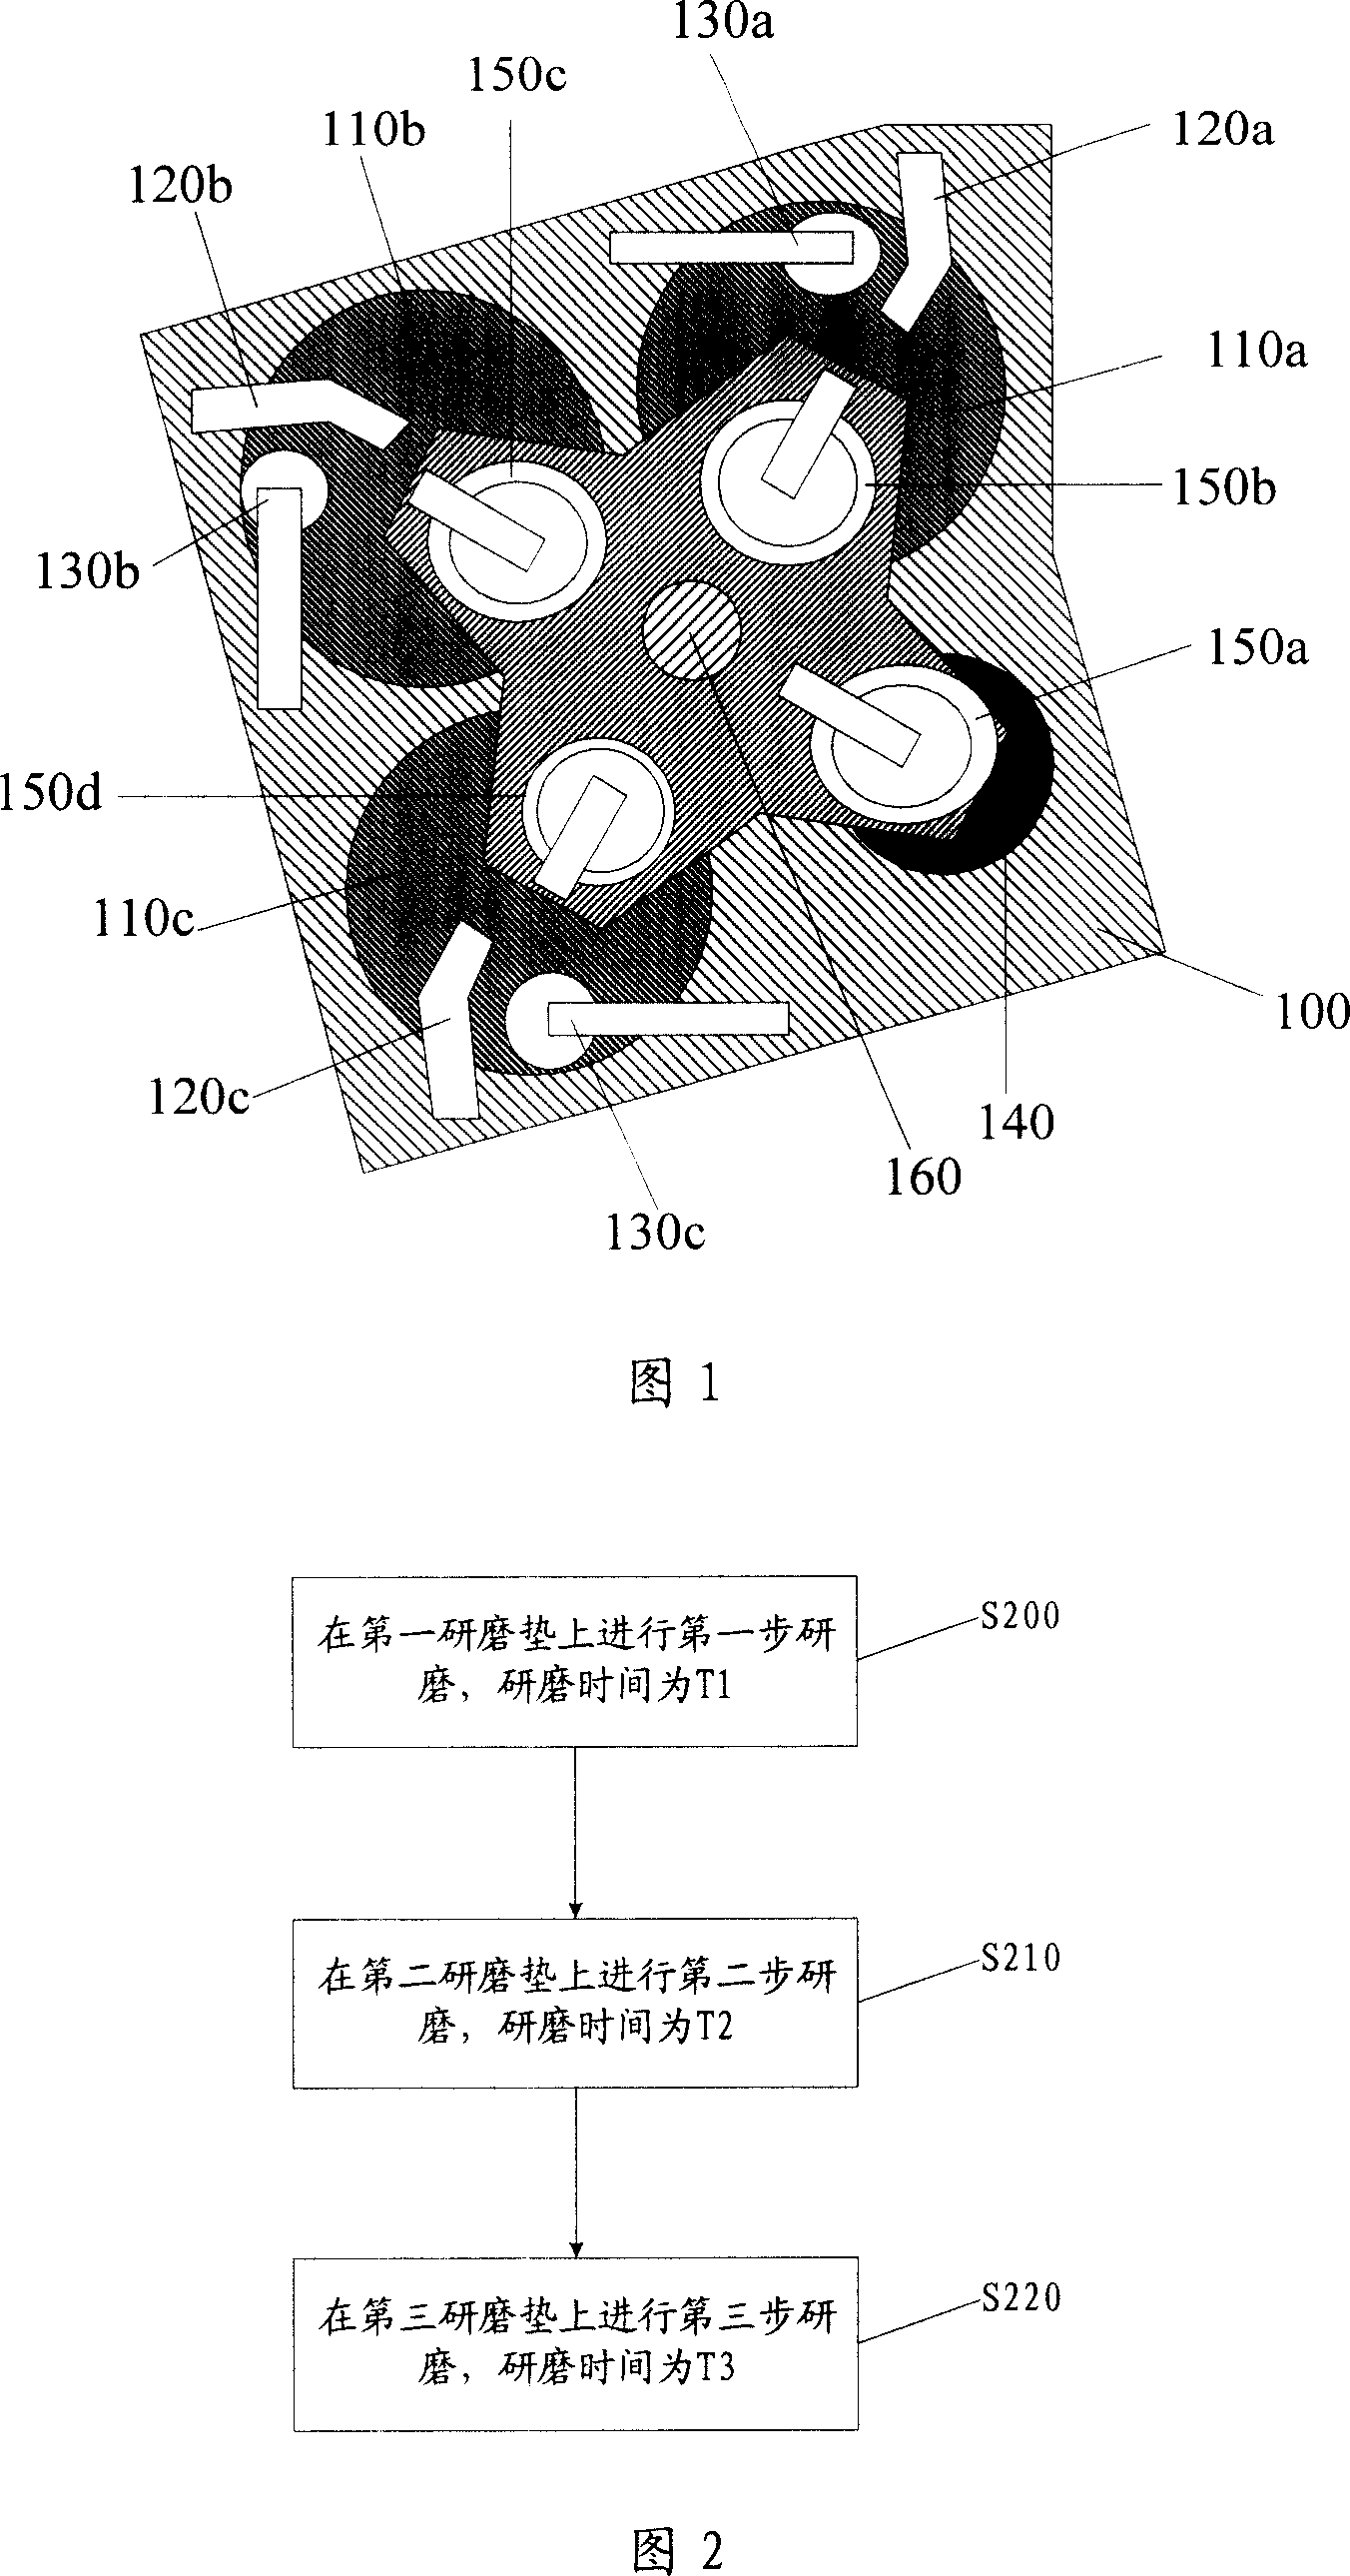 Chemical and mechanical grinding method